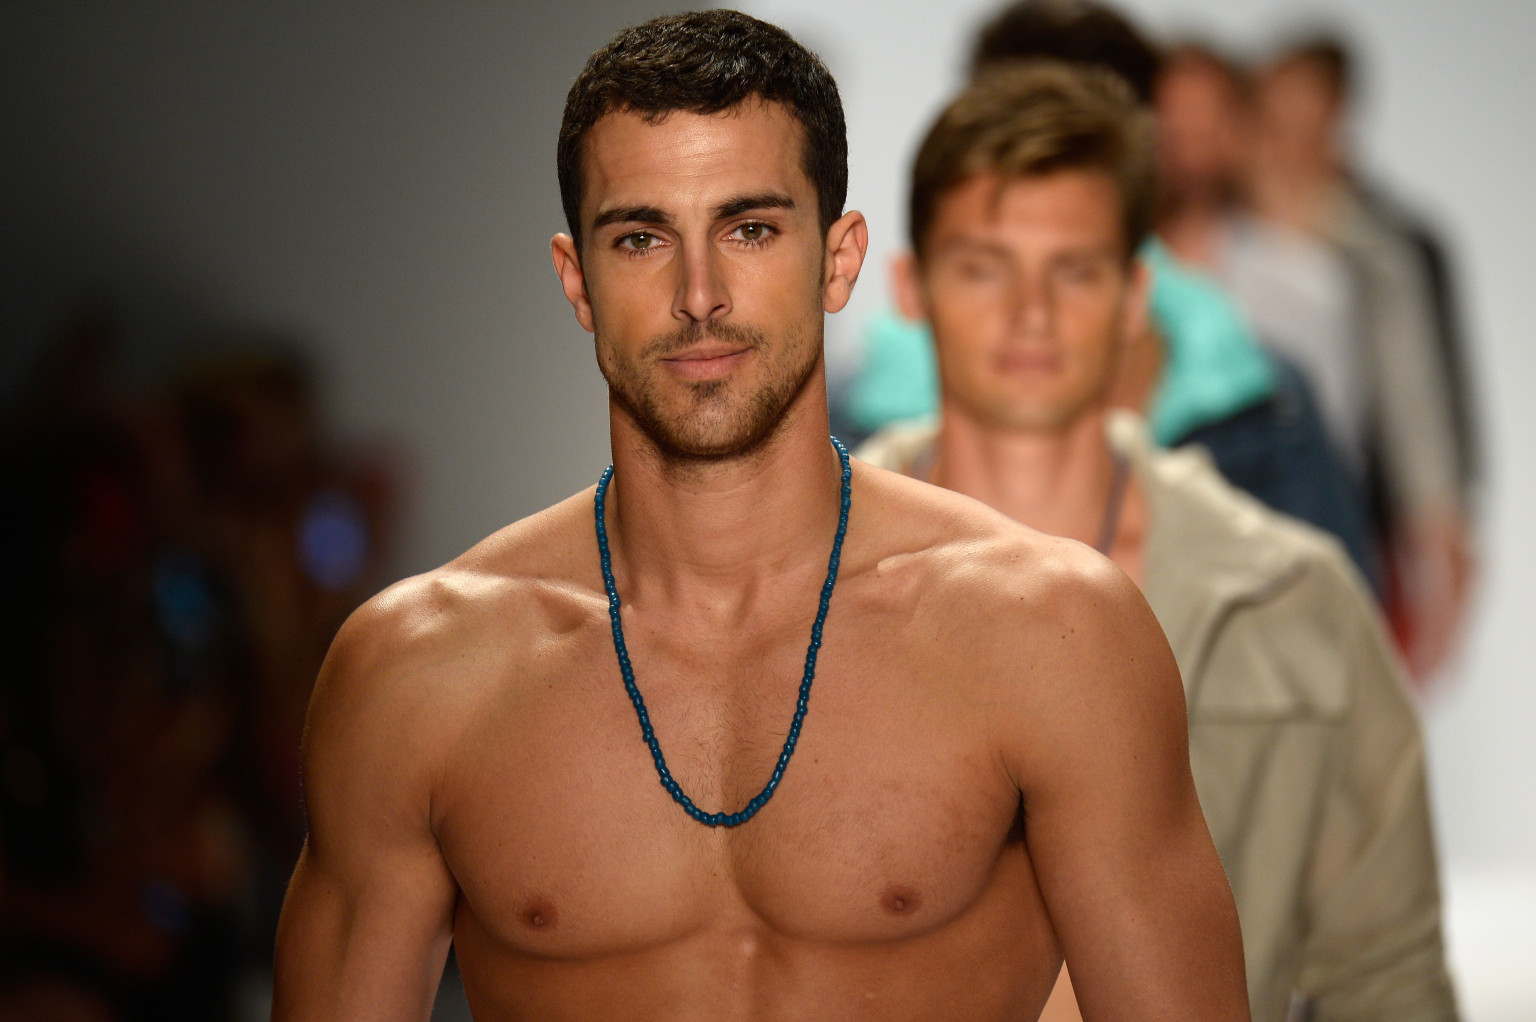 10. "The Top 10 Most Attractive Male Models with Blond Hair" by The Trend Spotter - wide 5